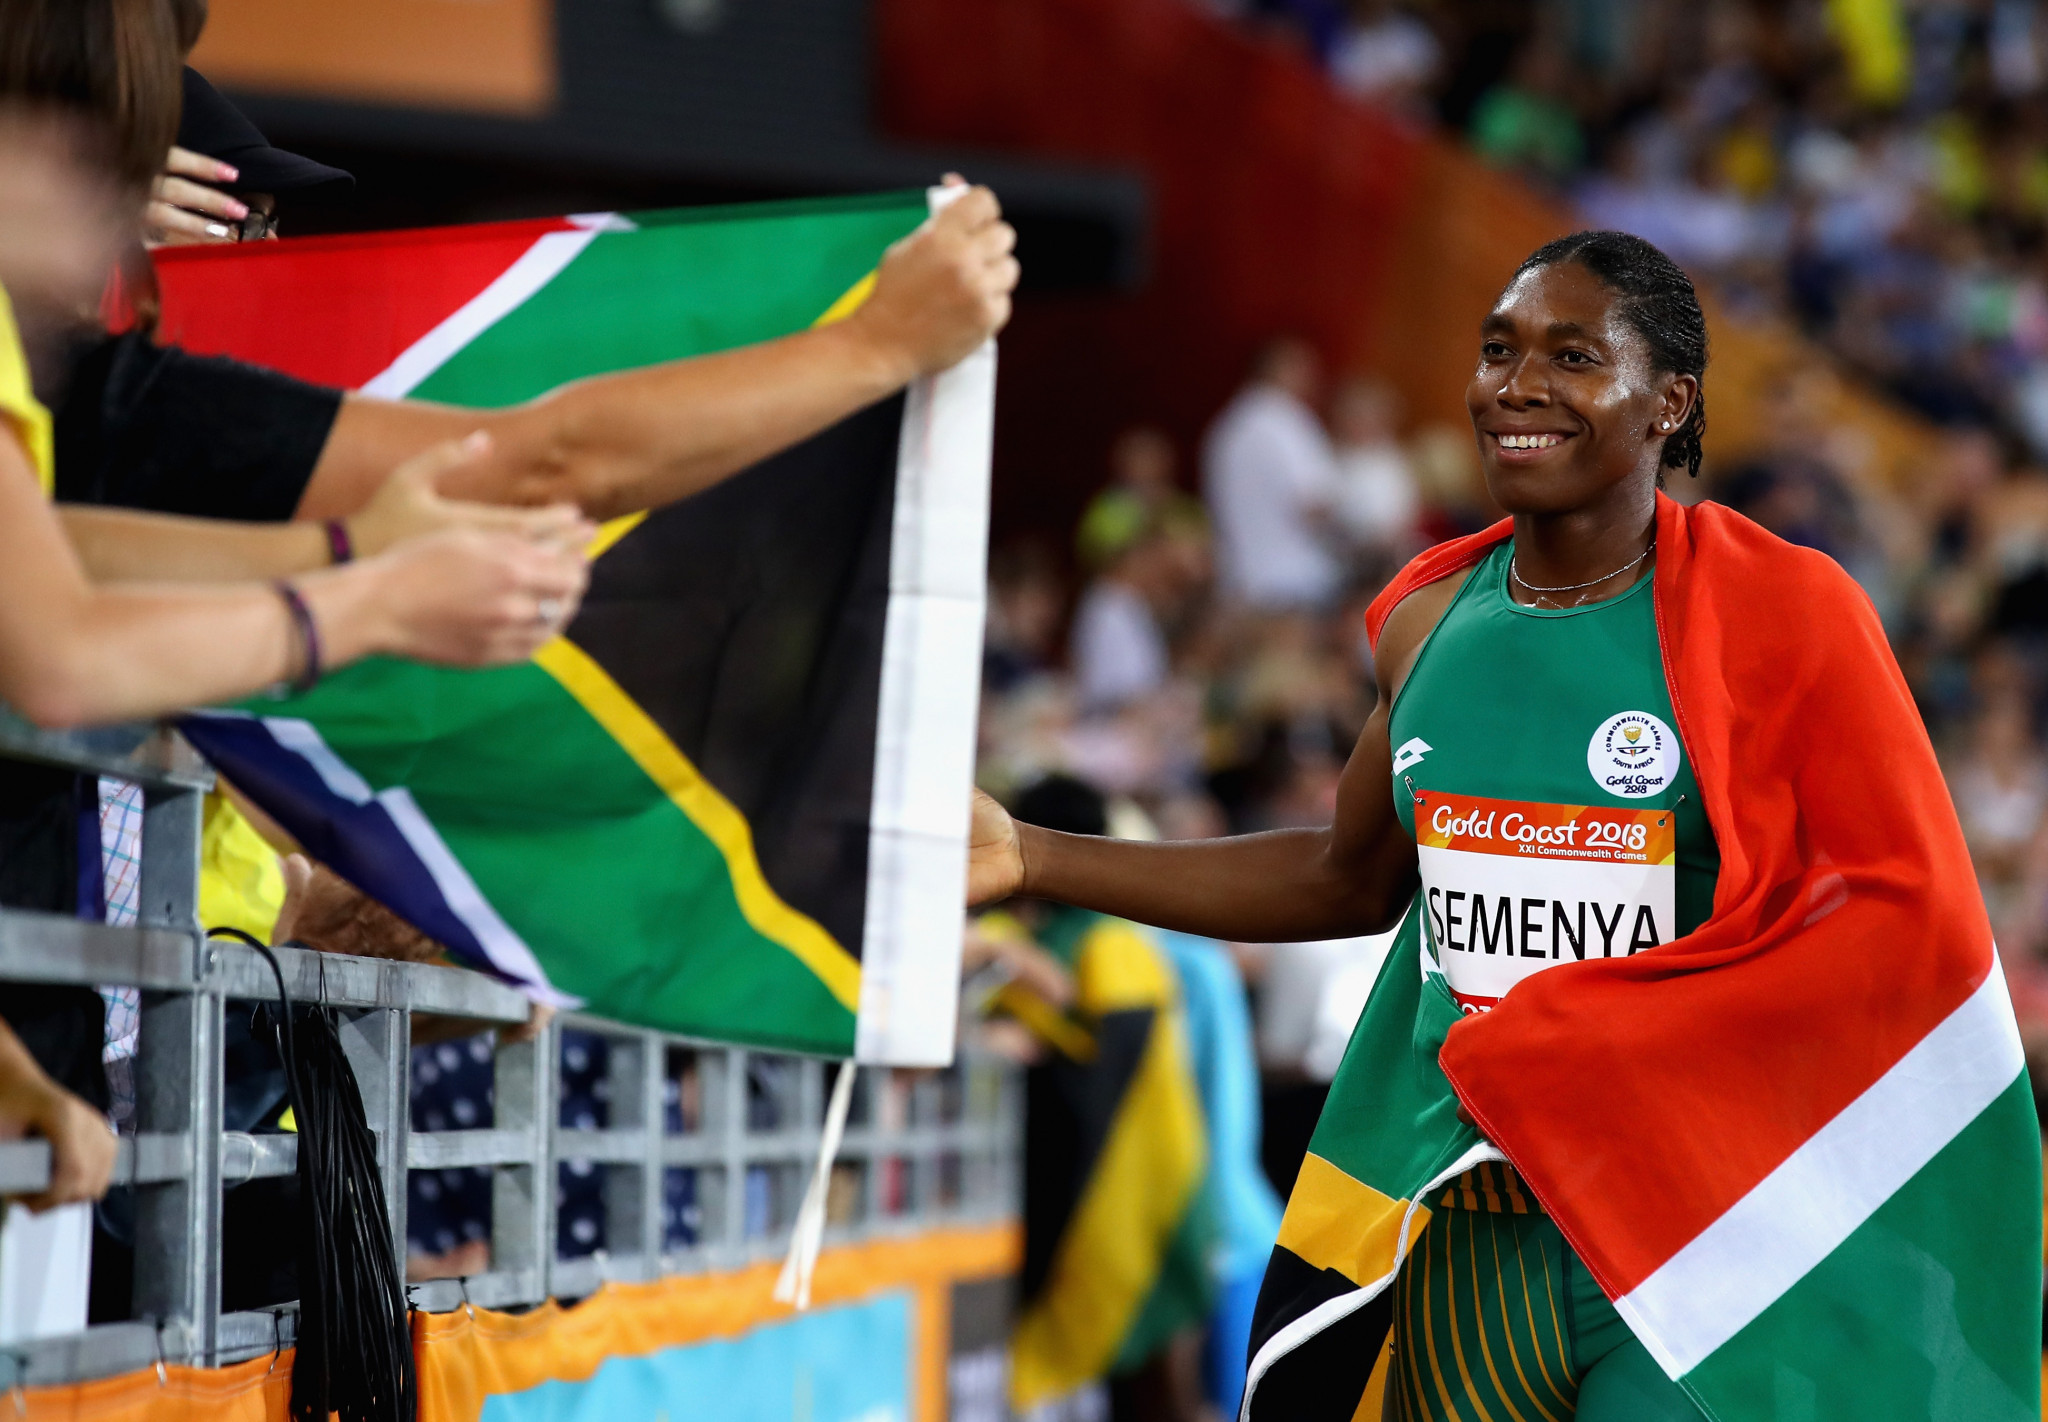 South Africa's Caster Semenya completed the 800m and 1500m middle-distance double ©Getty Images